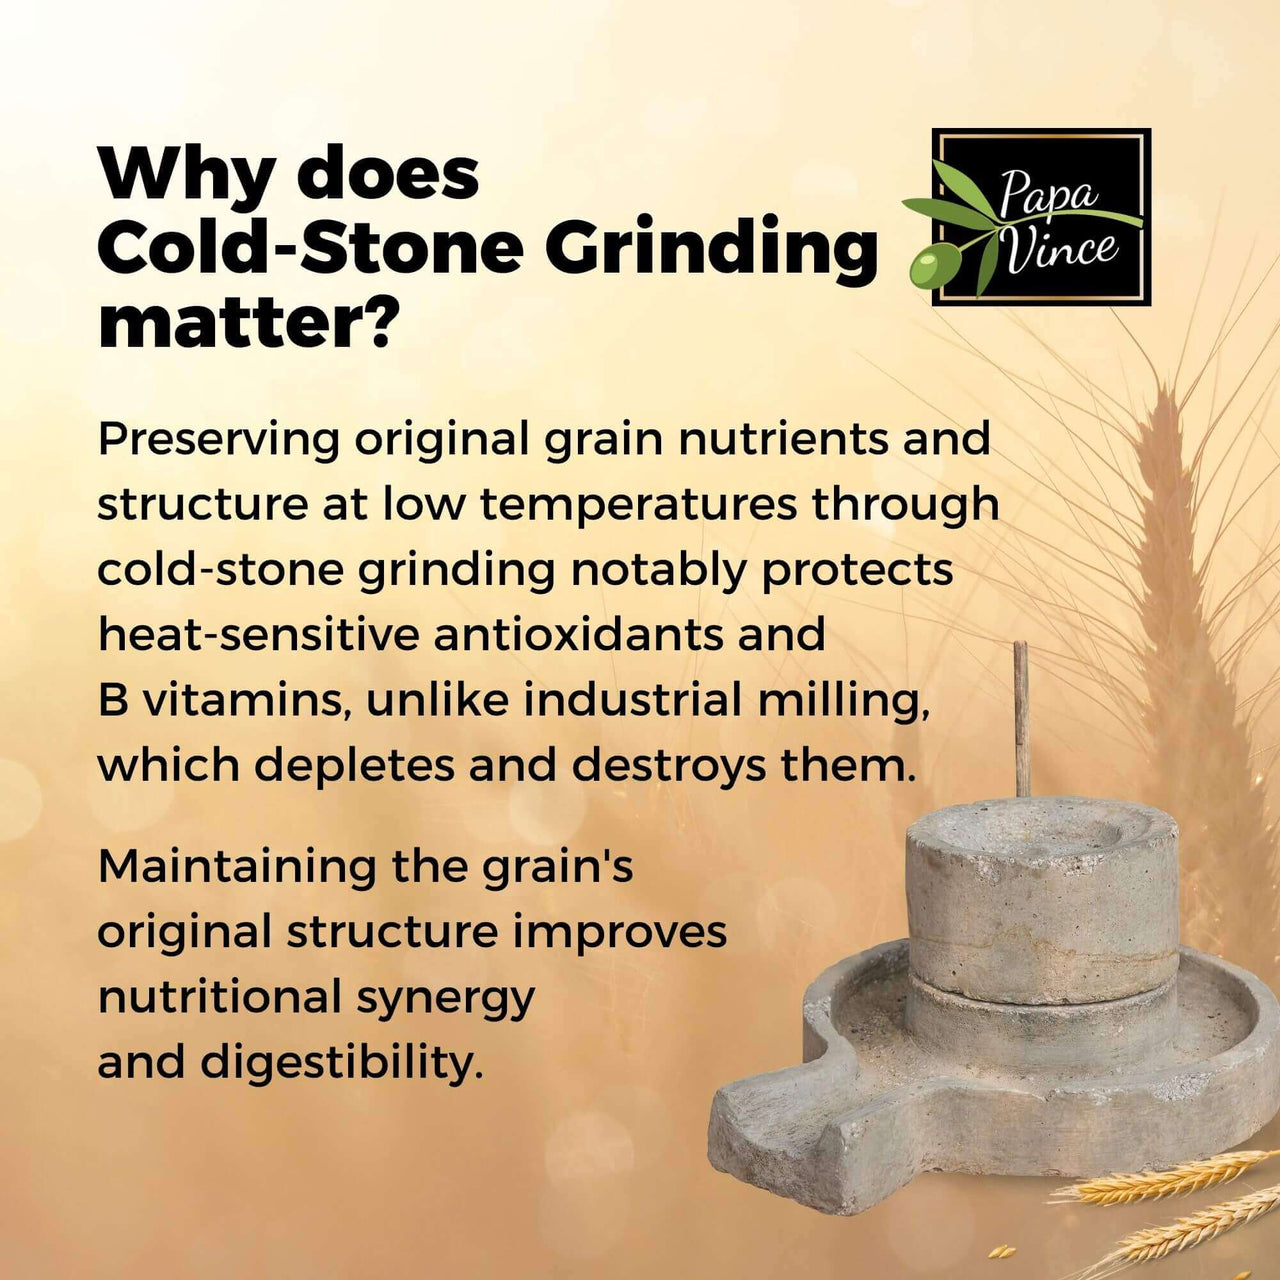 Why does Cold-Stone Grinding matter?  Preserving original grain nutrients and structure at low temperatures through cold-stone grinding notably protects heat-sensitive antioxidants and B vitamins, unlike industrial milling, which depletes and destroys them. Maintaining the grain's original structure improves nutritional synergy and digestibility.